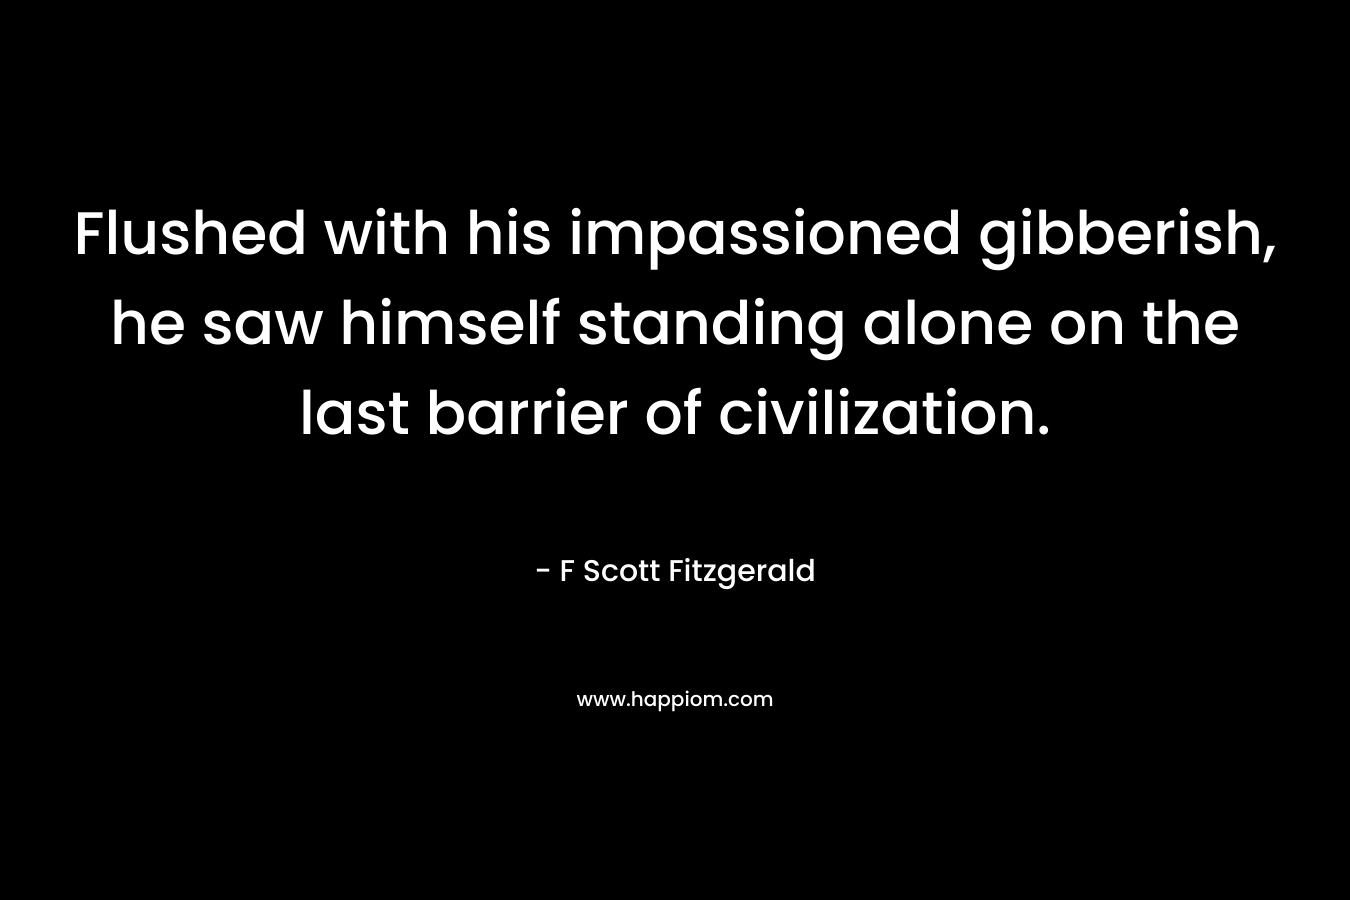 Flushed with his impassioned gibberish, he saw himself standing alone on the last barrier of civilization. – F Scott Fitzgerald